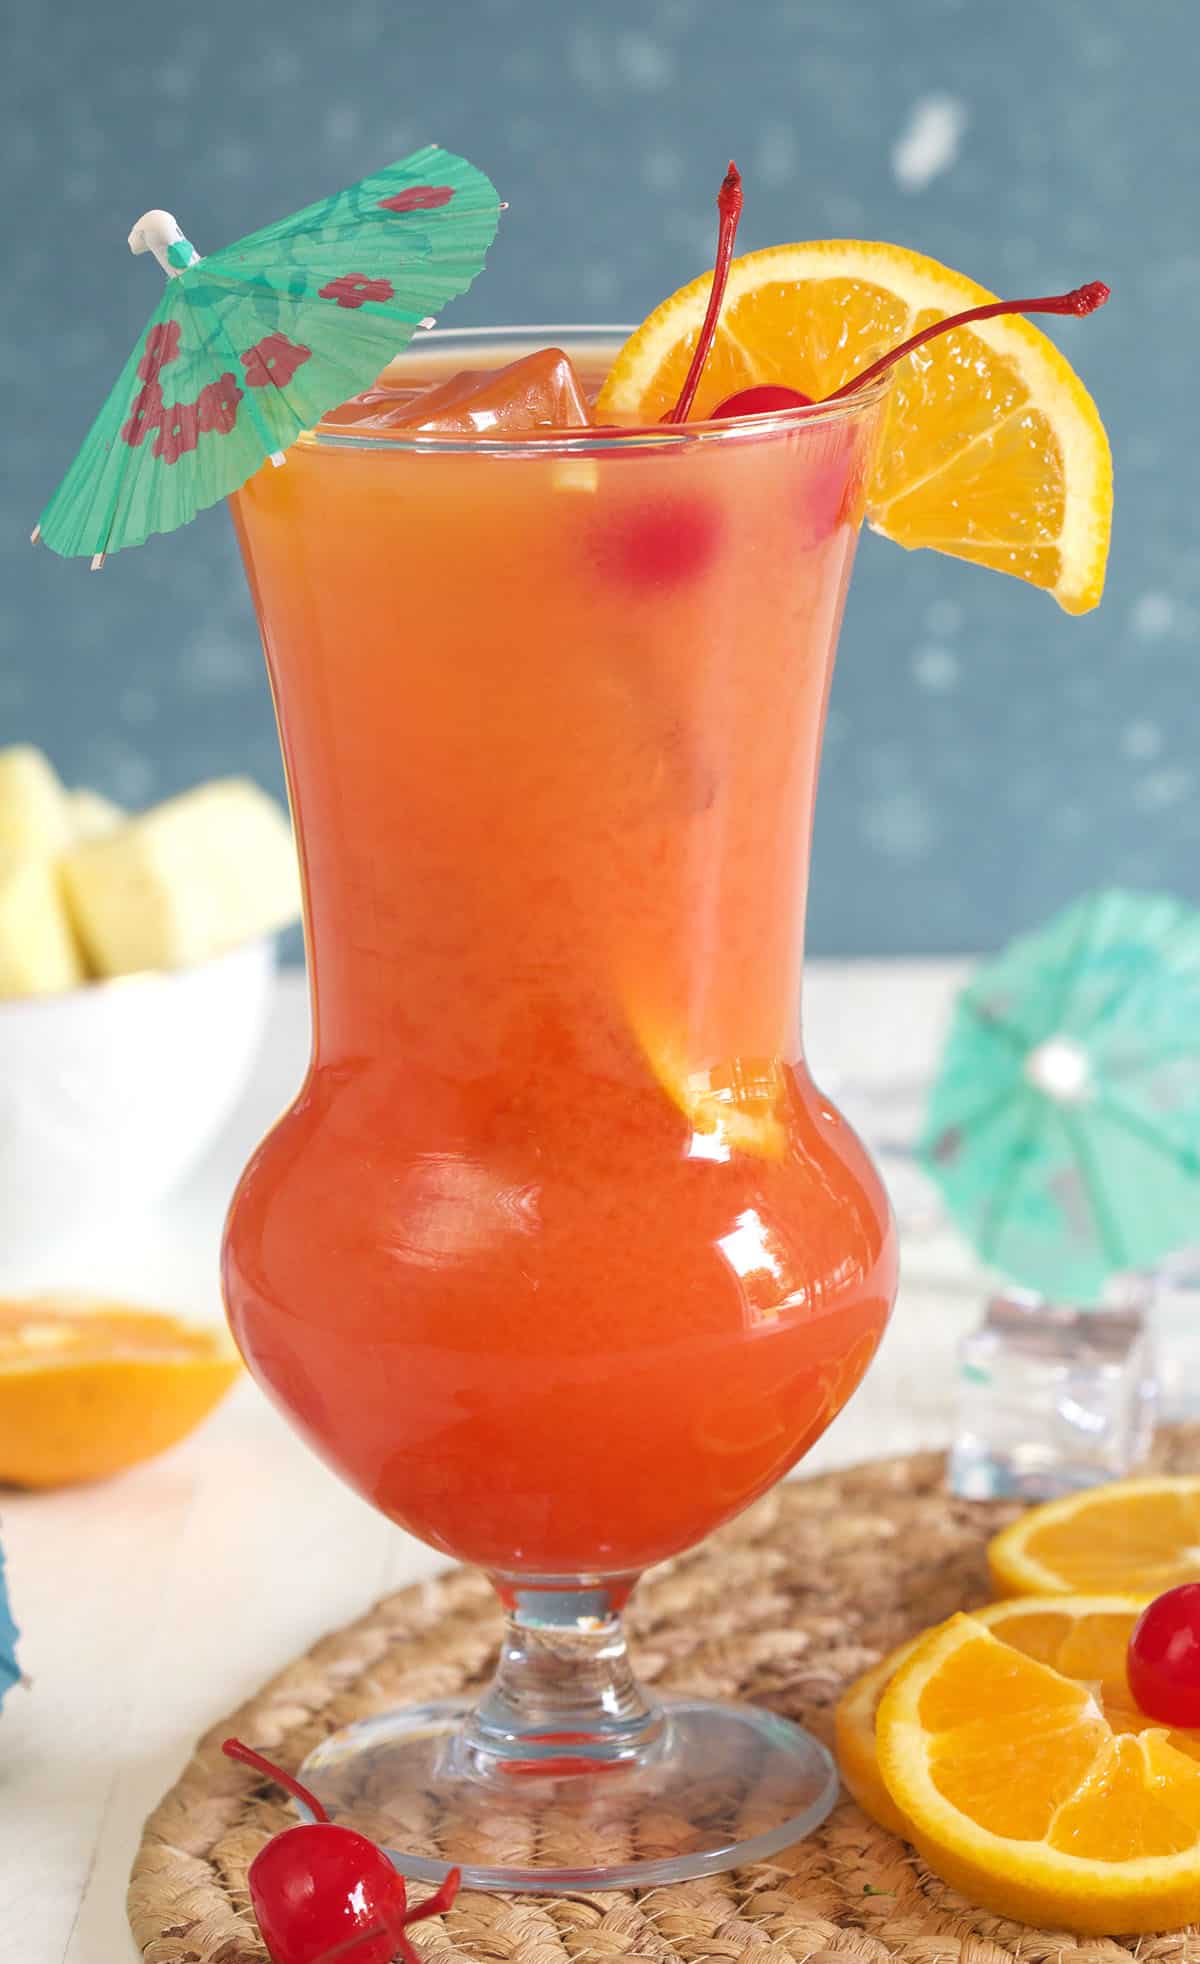 A hurricane is topped with cherries, an orange slice, and an umbrella.